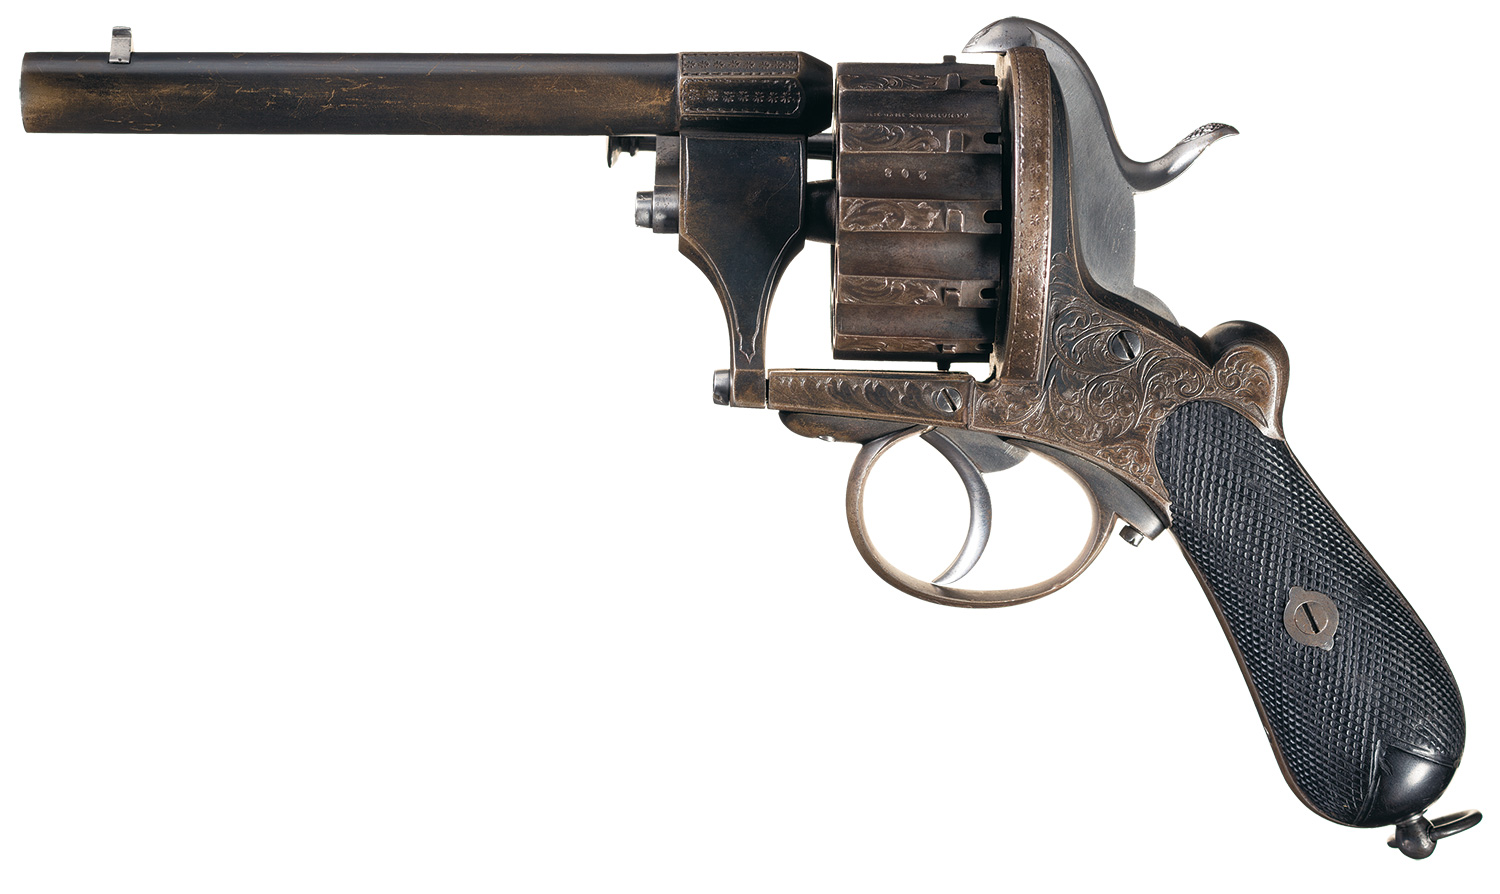 Chaineux Pinfire Revolver Rock Island Auction 0435